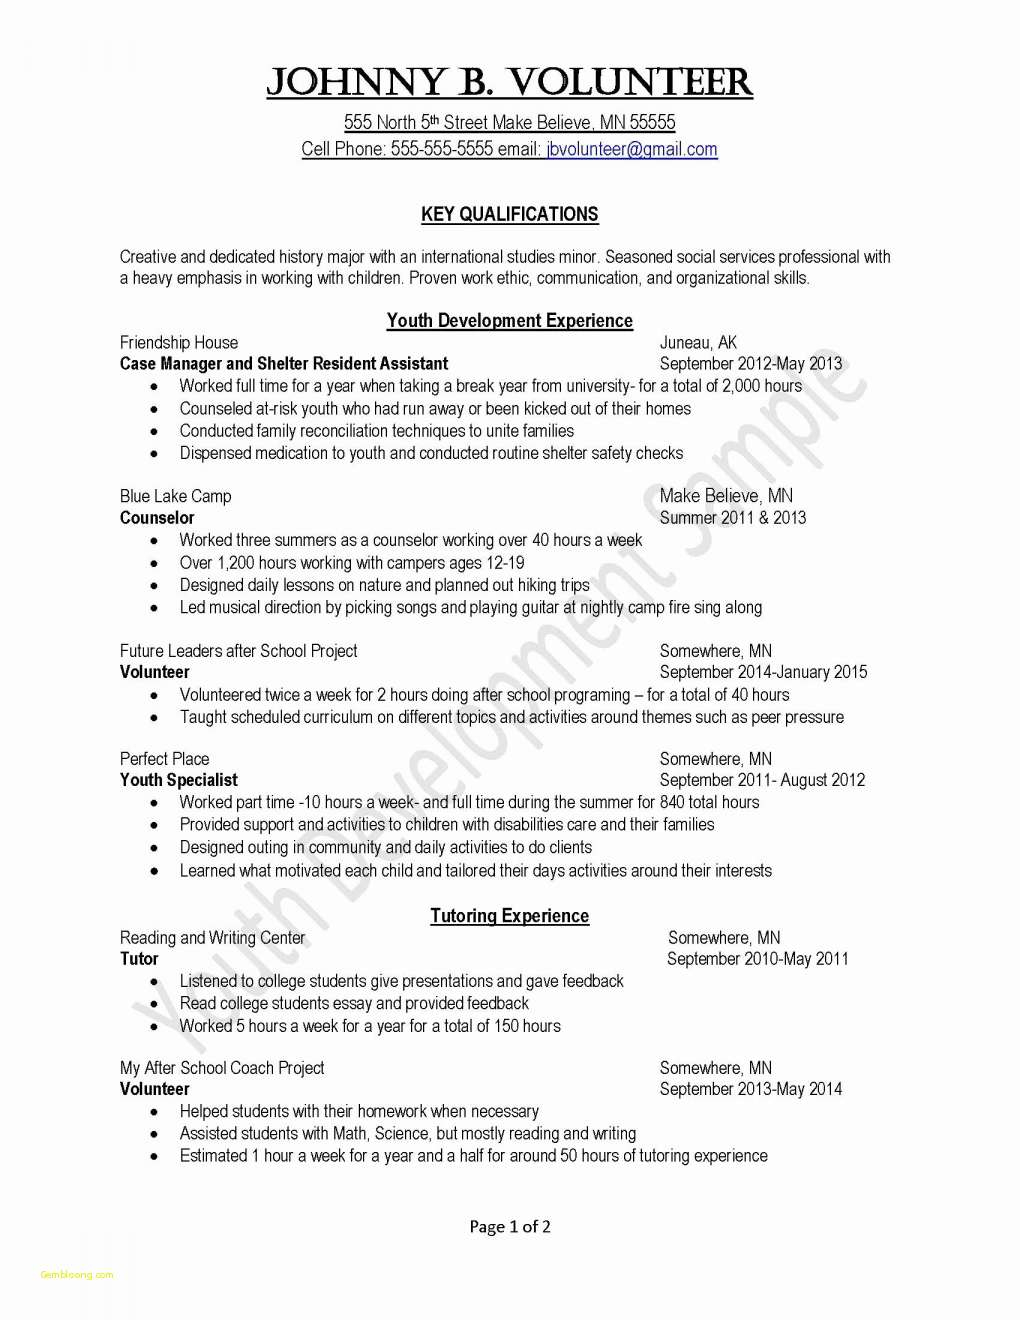 Marketing Letter Template Free - Free Resume Templates for Students Takenosumi